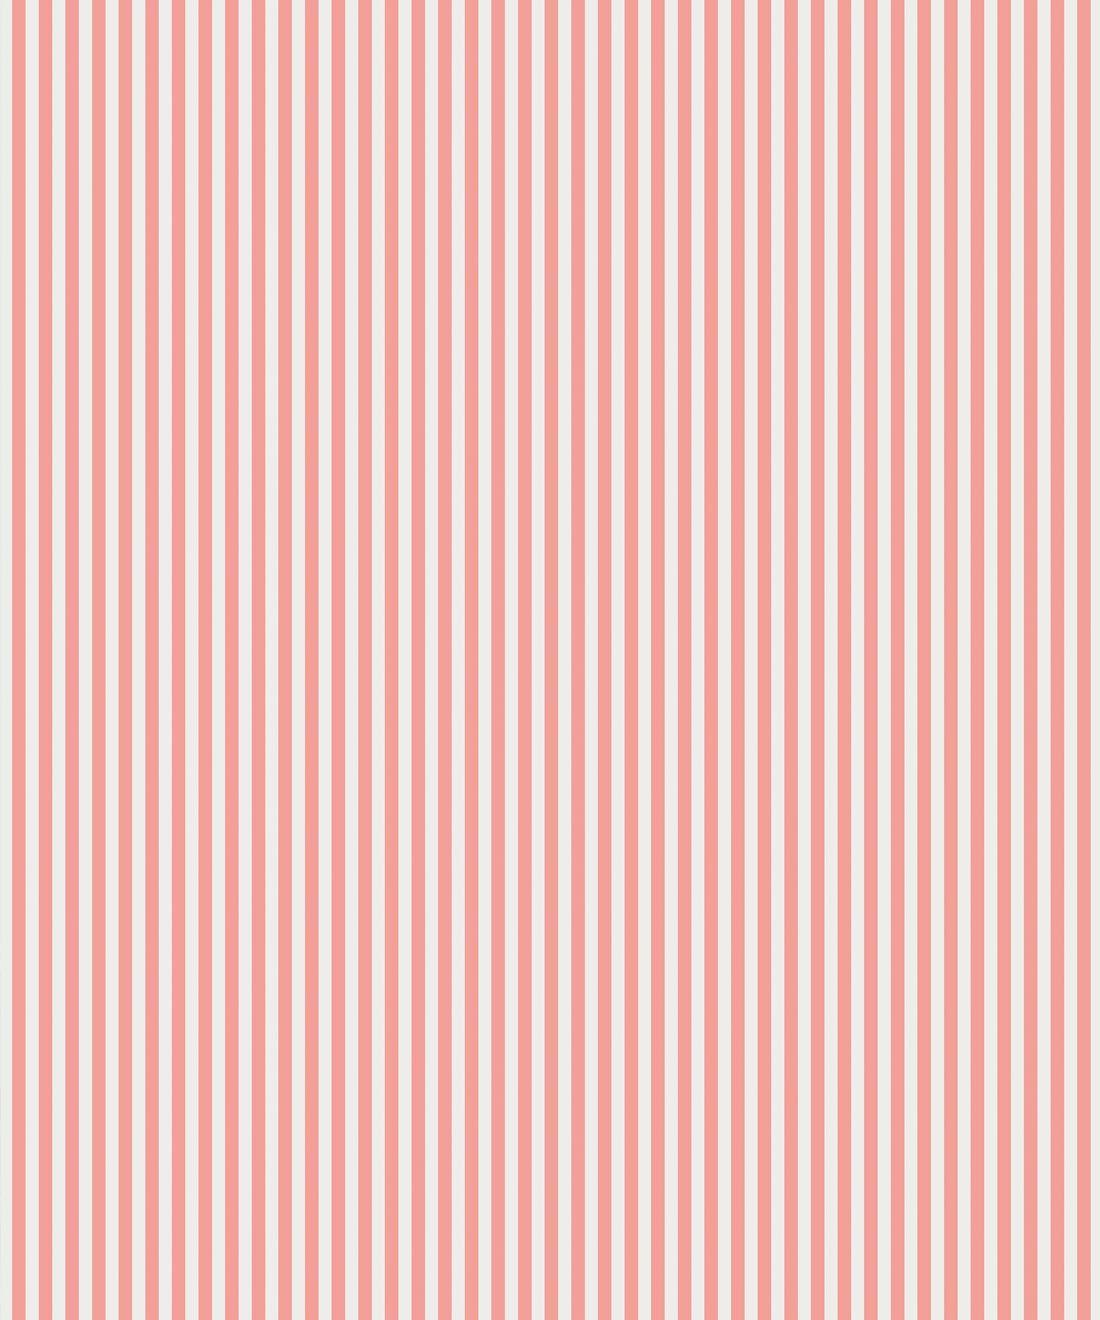 AS Creation Thick Stripe Lines Wallpaper Non Woven Textured Pink White  367184